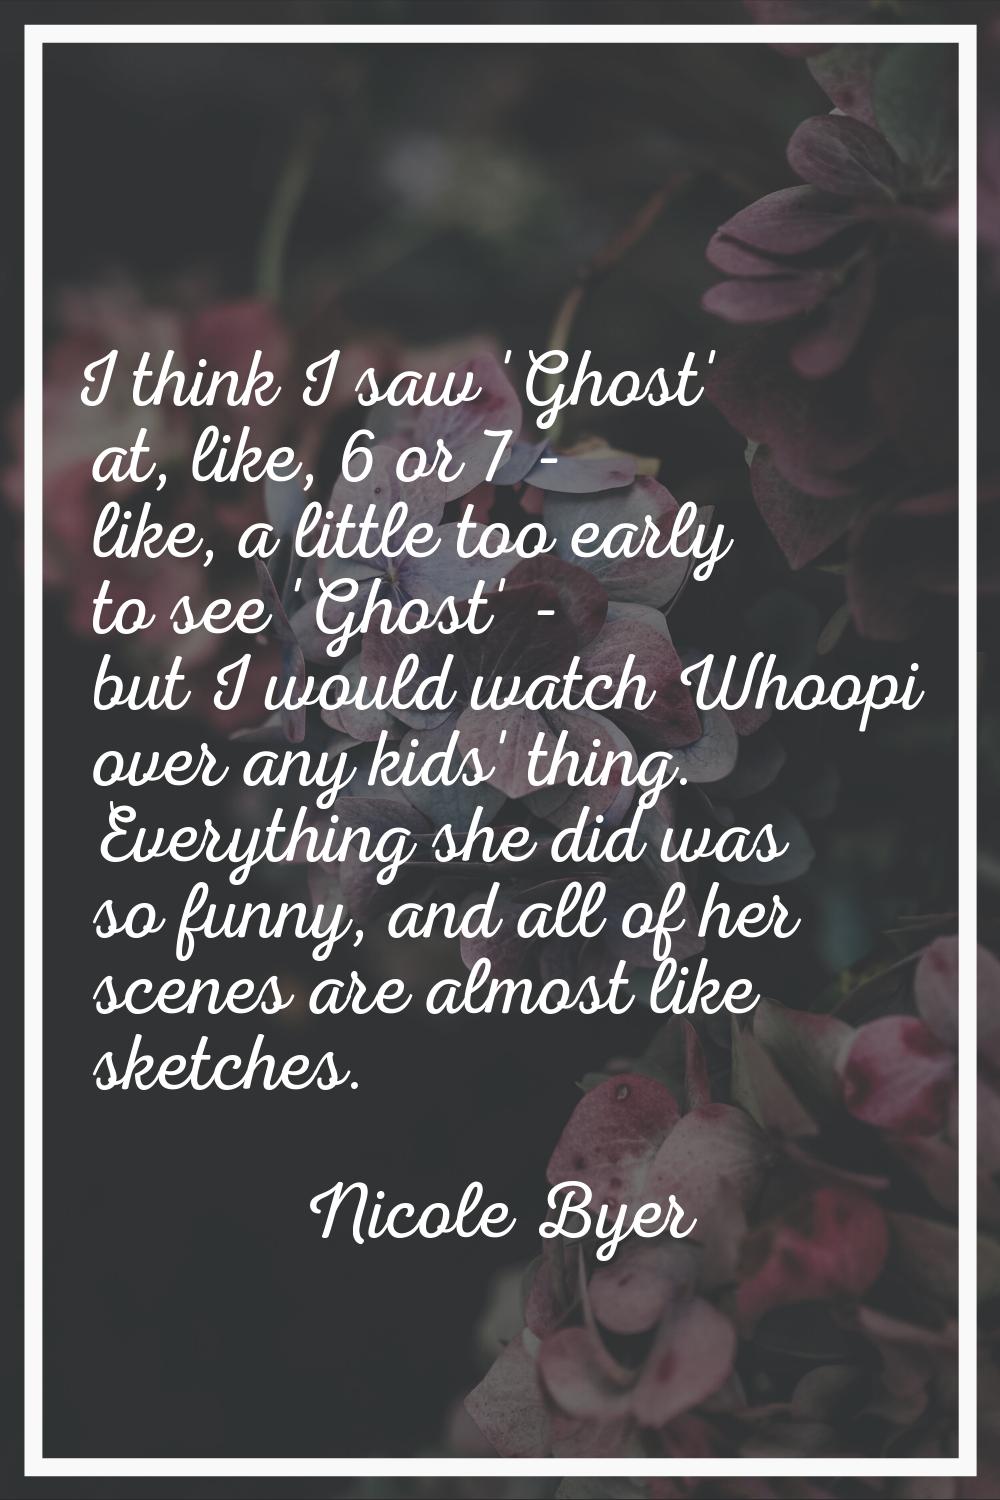 I think I saw 'Ghost' at, like, 6 or 7 - like, a little too early to see 'Ghost' - but I would watc